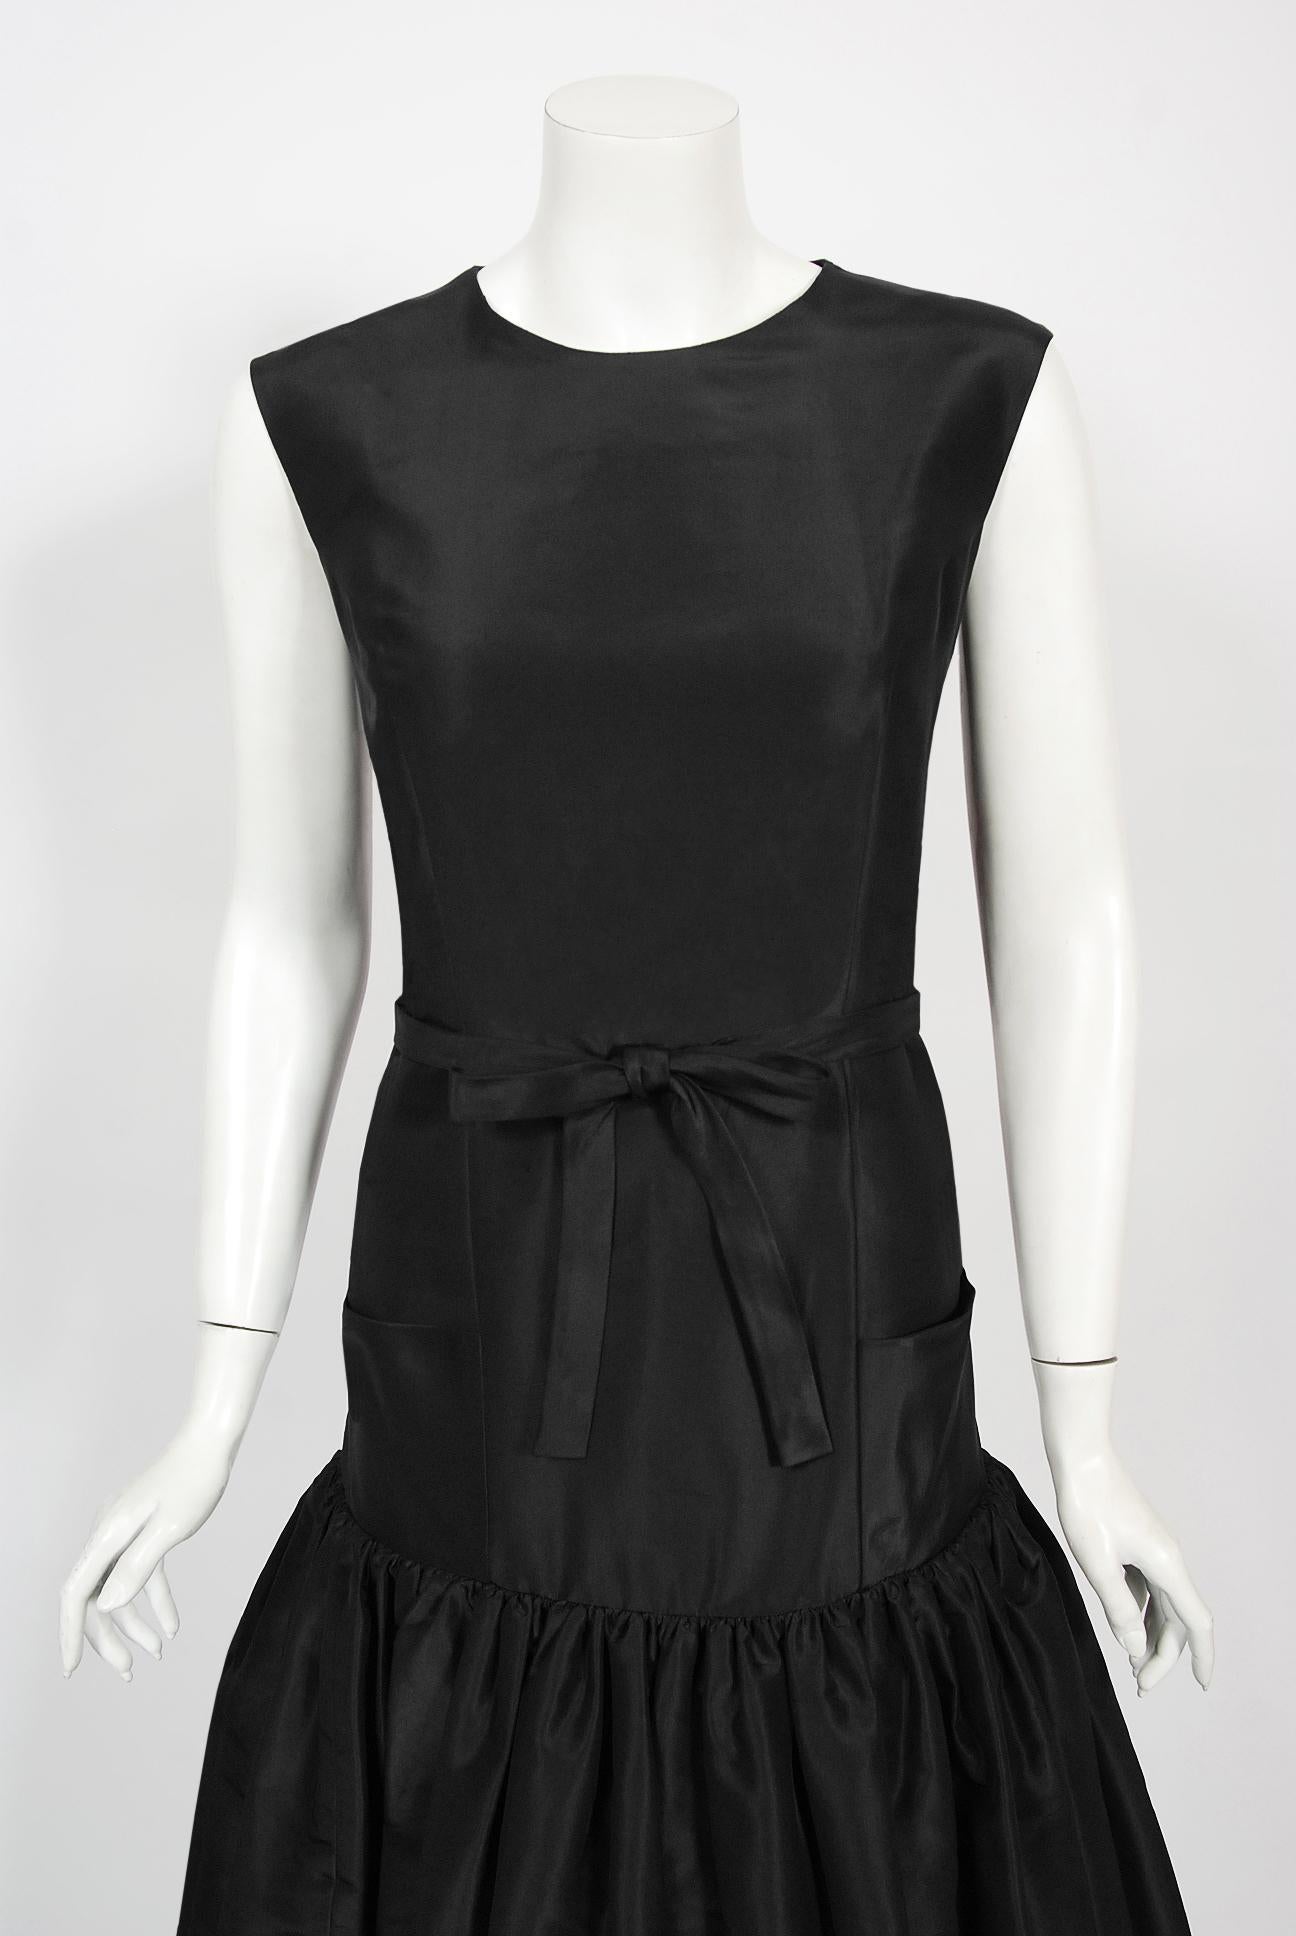 An incredibly chic and totally timeless Traina-Norell for I. Magnin designer cocktail dress dating back to their 1956 couture collection. Fashioned in a luxurious mid-weight black silk faille, this rare garment exemplifies their signature blend of